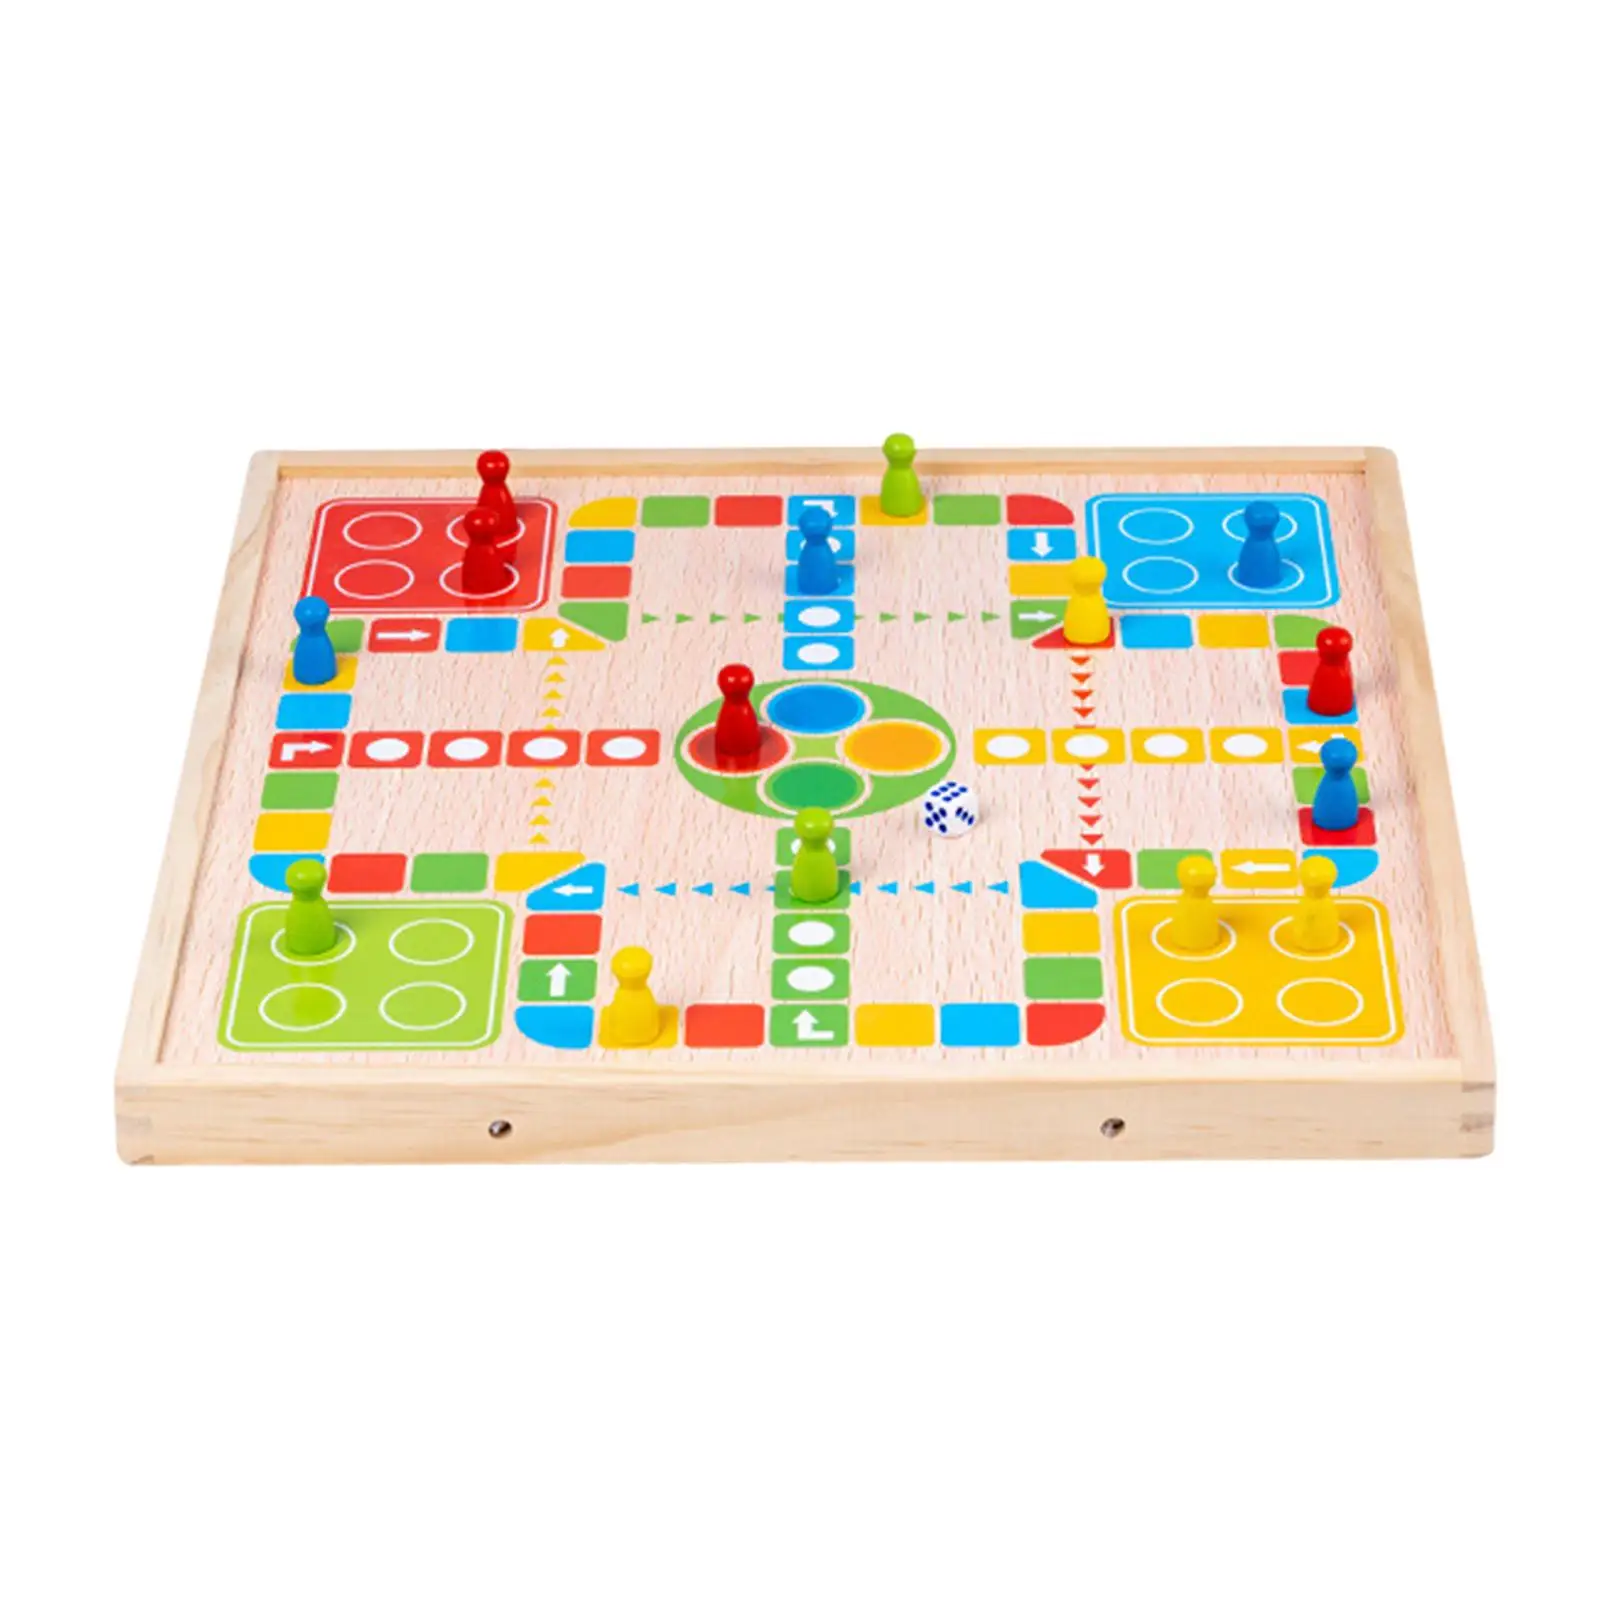 Flying Chess Parent Child Interactive Toy Table Board Puck Game Football Board for Early Education Toys Gifts Teaching Aids